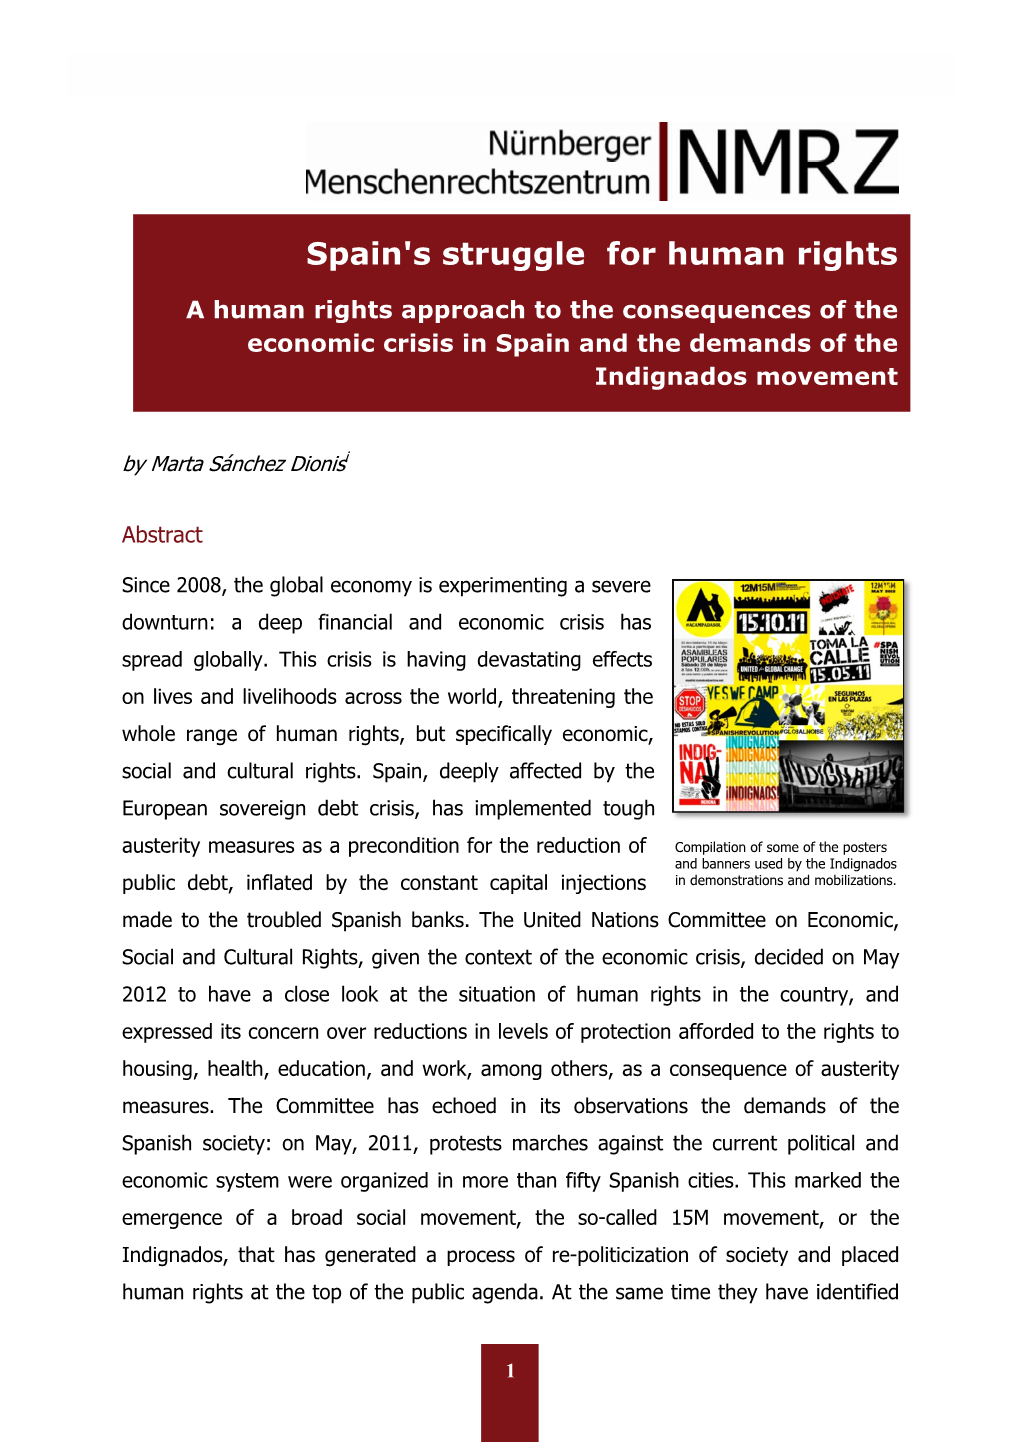 Spain's Struggle for Human Rights